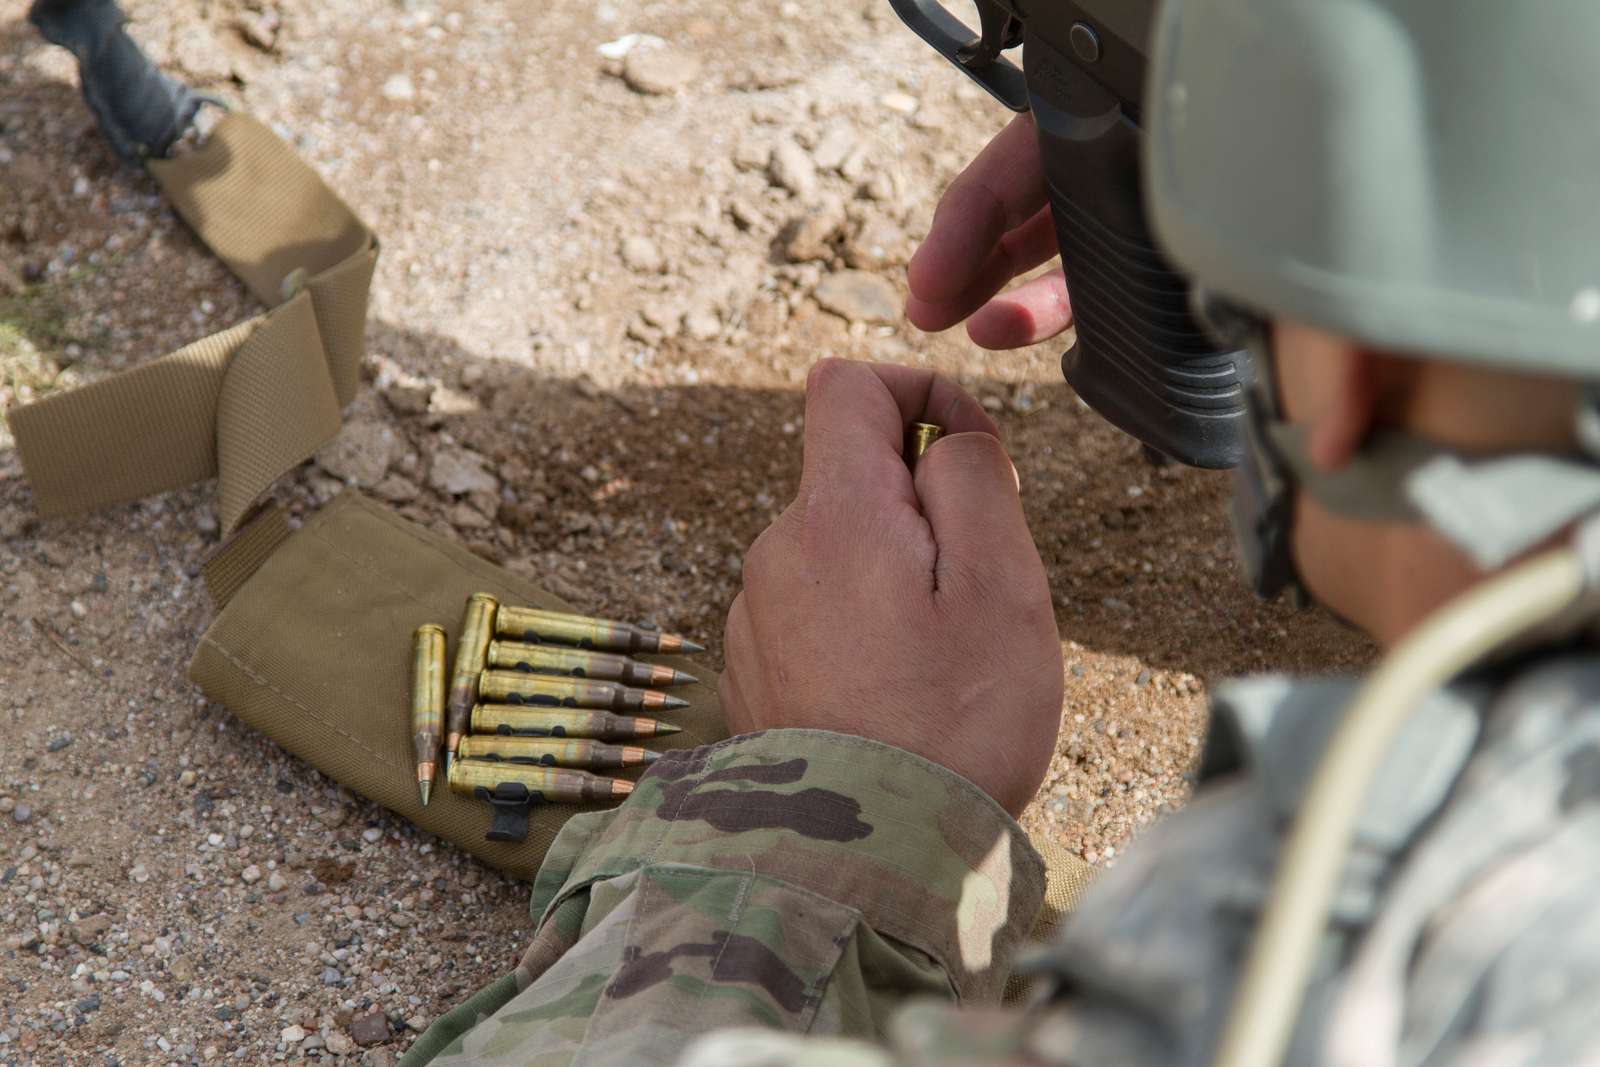 How to keep ammo zeroing